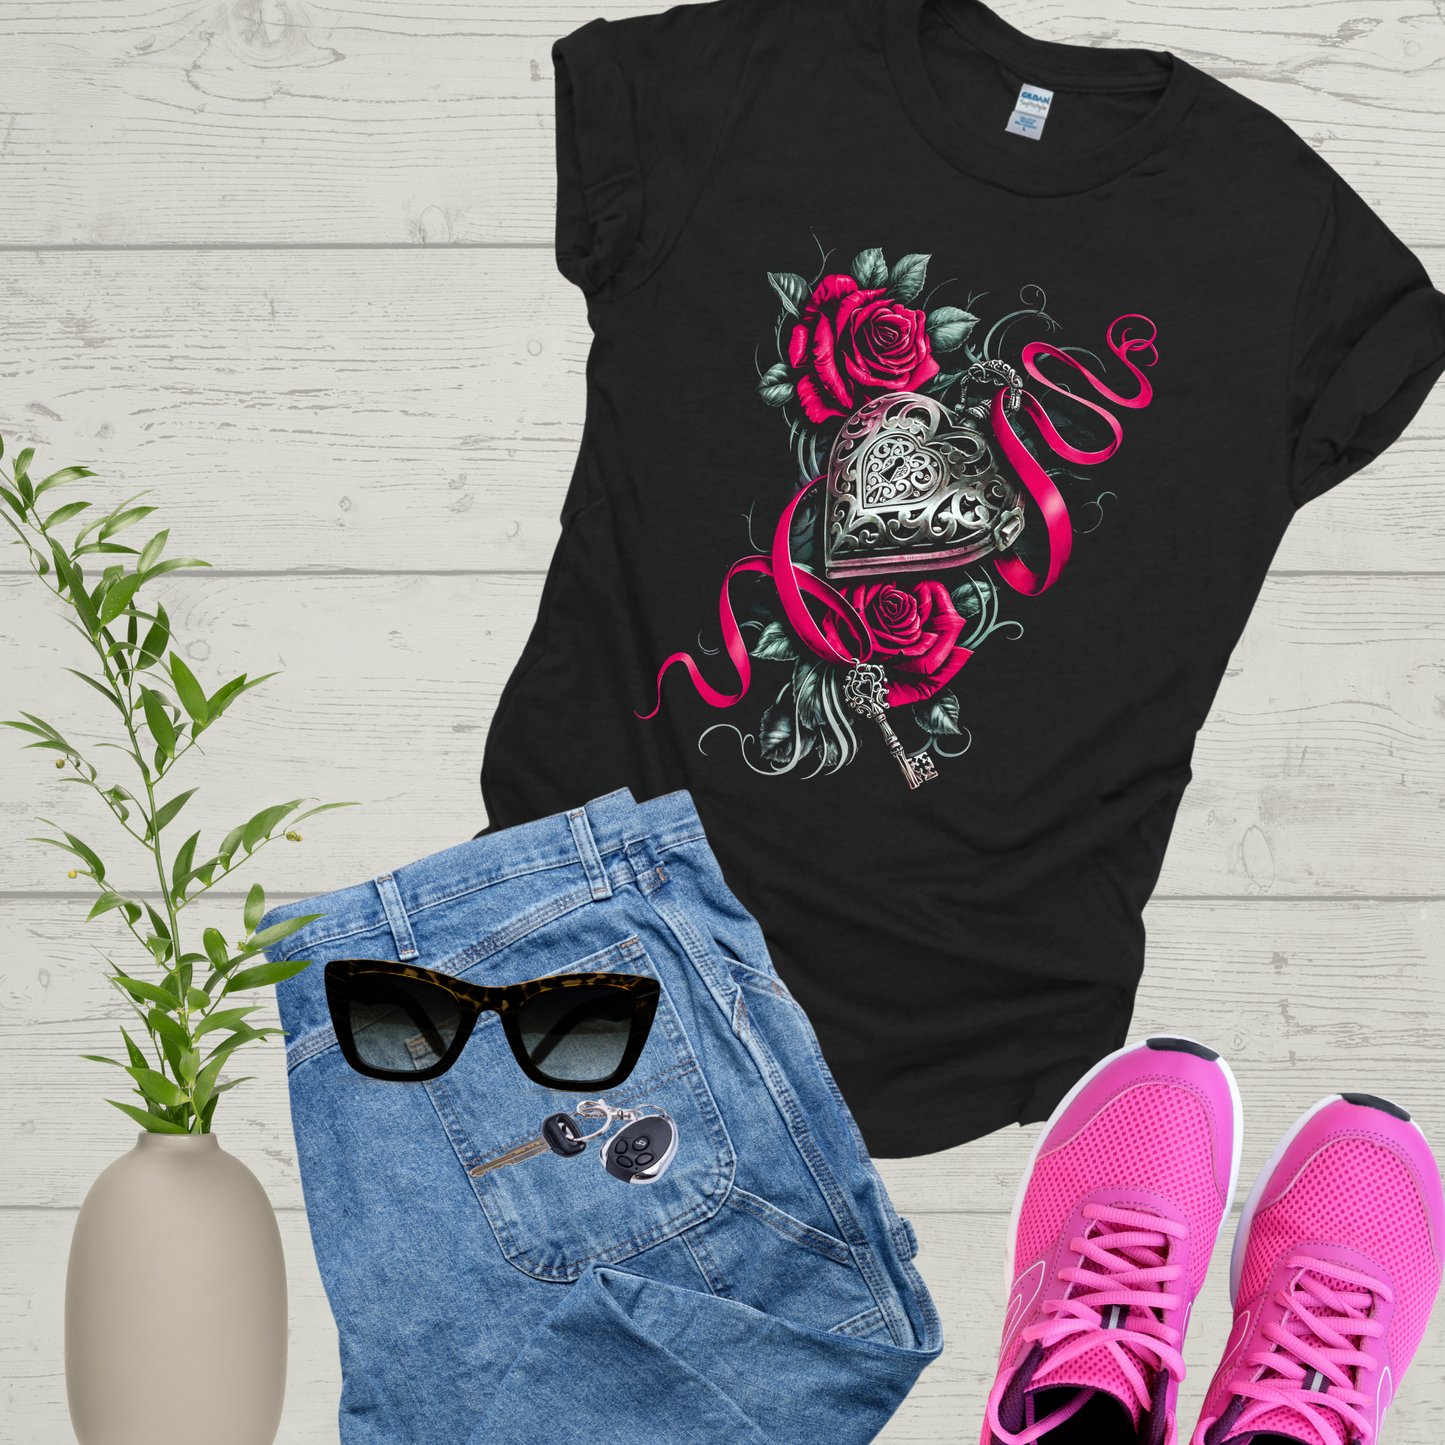 Lock and Key, Locket with Red Roses Gift Tshirt, Lock and Key with Flowers